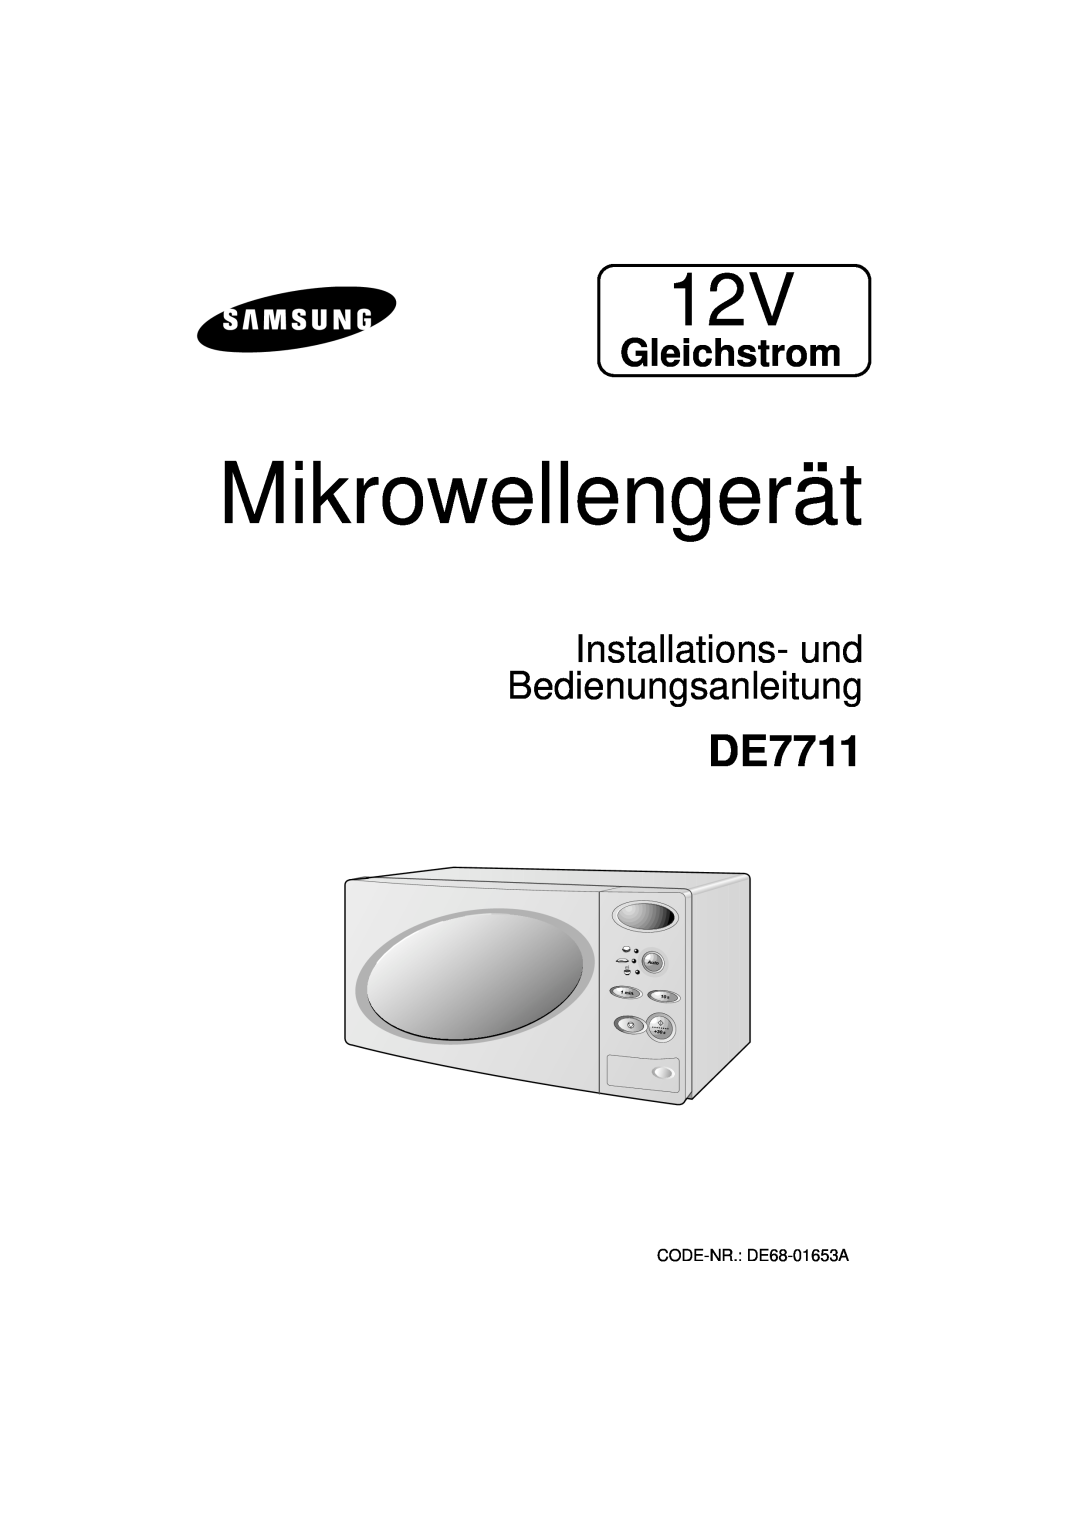 Samsung DE7711N owner manual Microwave Oven, 12V DC, Installation and Owner’s Manual, CODE NO. : DE68-03008A 